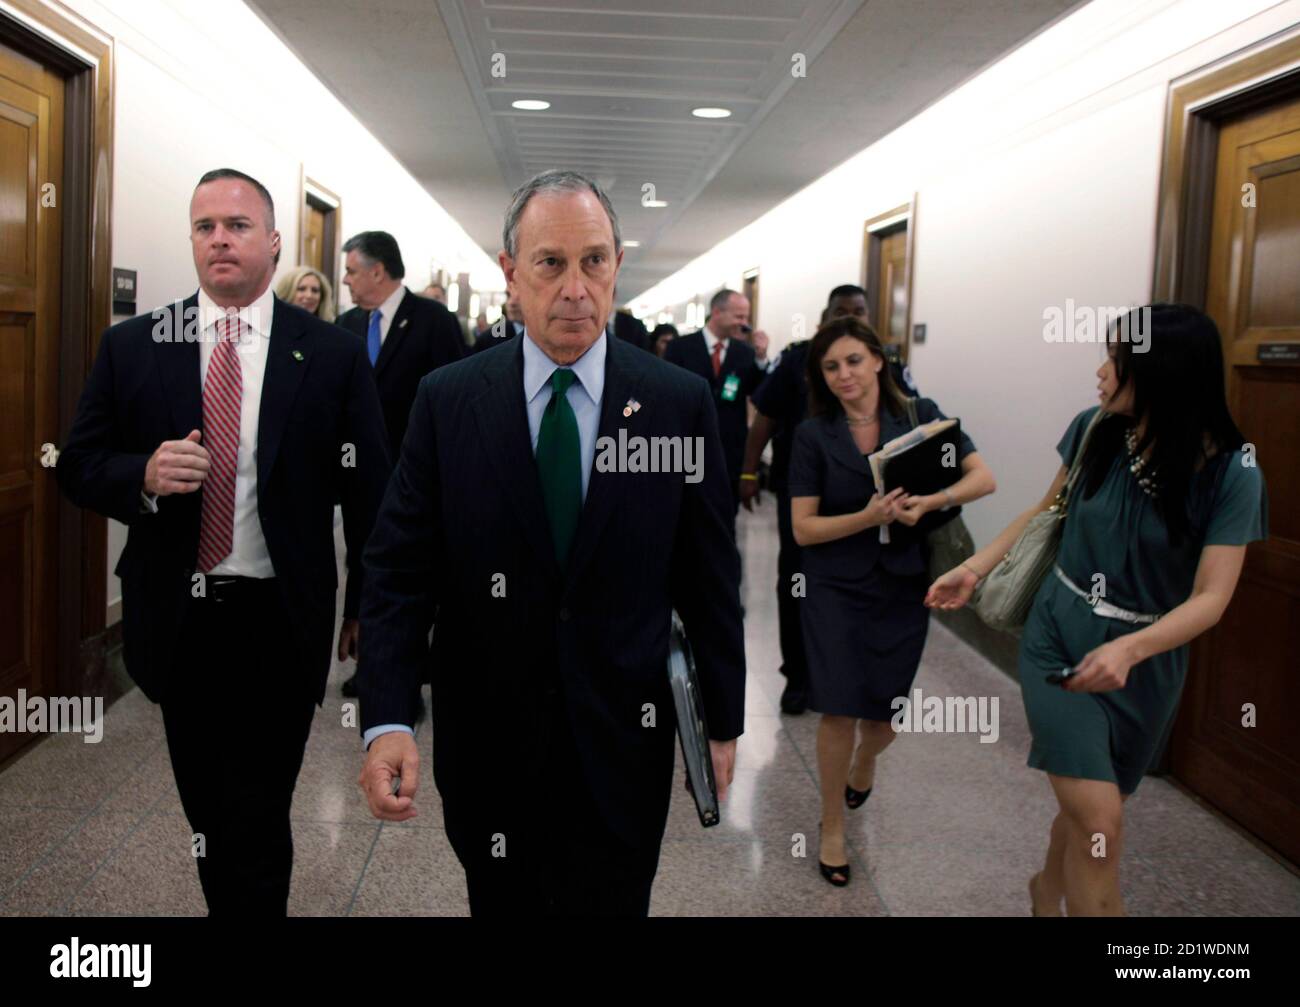 New York City Mayor Michael Bloomberg walks down a hallway in Senate Dirksen Building after his testimony before the Senate Homeland Security and Governmental Affairs Committee on Capitol Hill in Washington May 5, 2010. REUTERS/Yuri Gripas (UNITED STATES - Tags: POLITICS CRIME LAW) Stock Photo